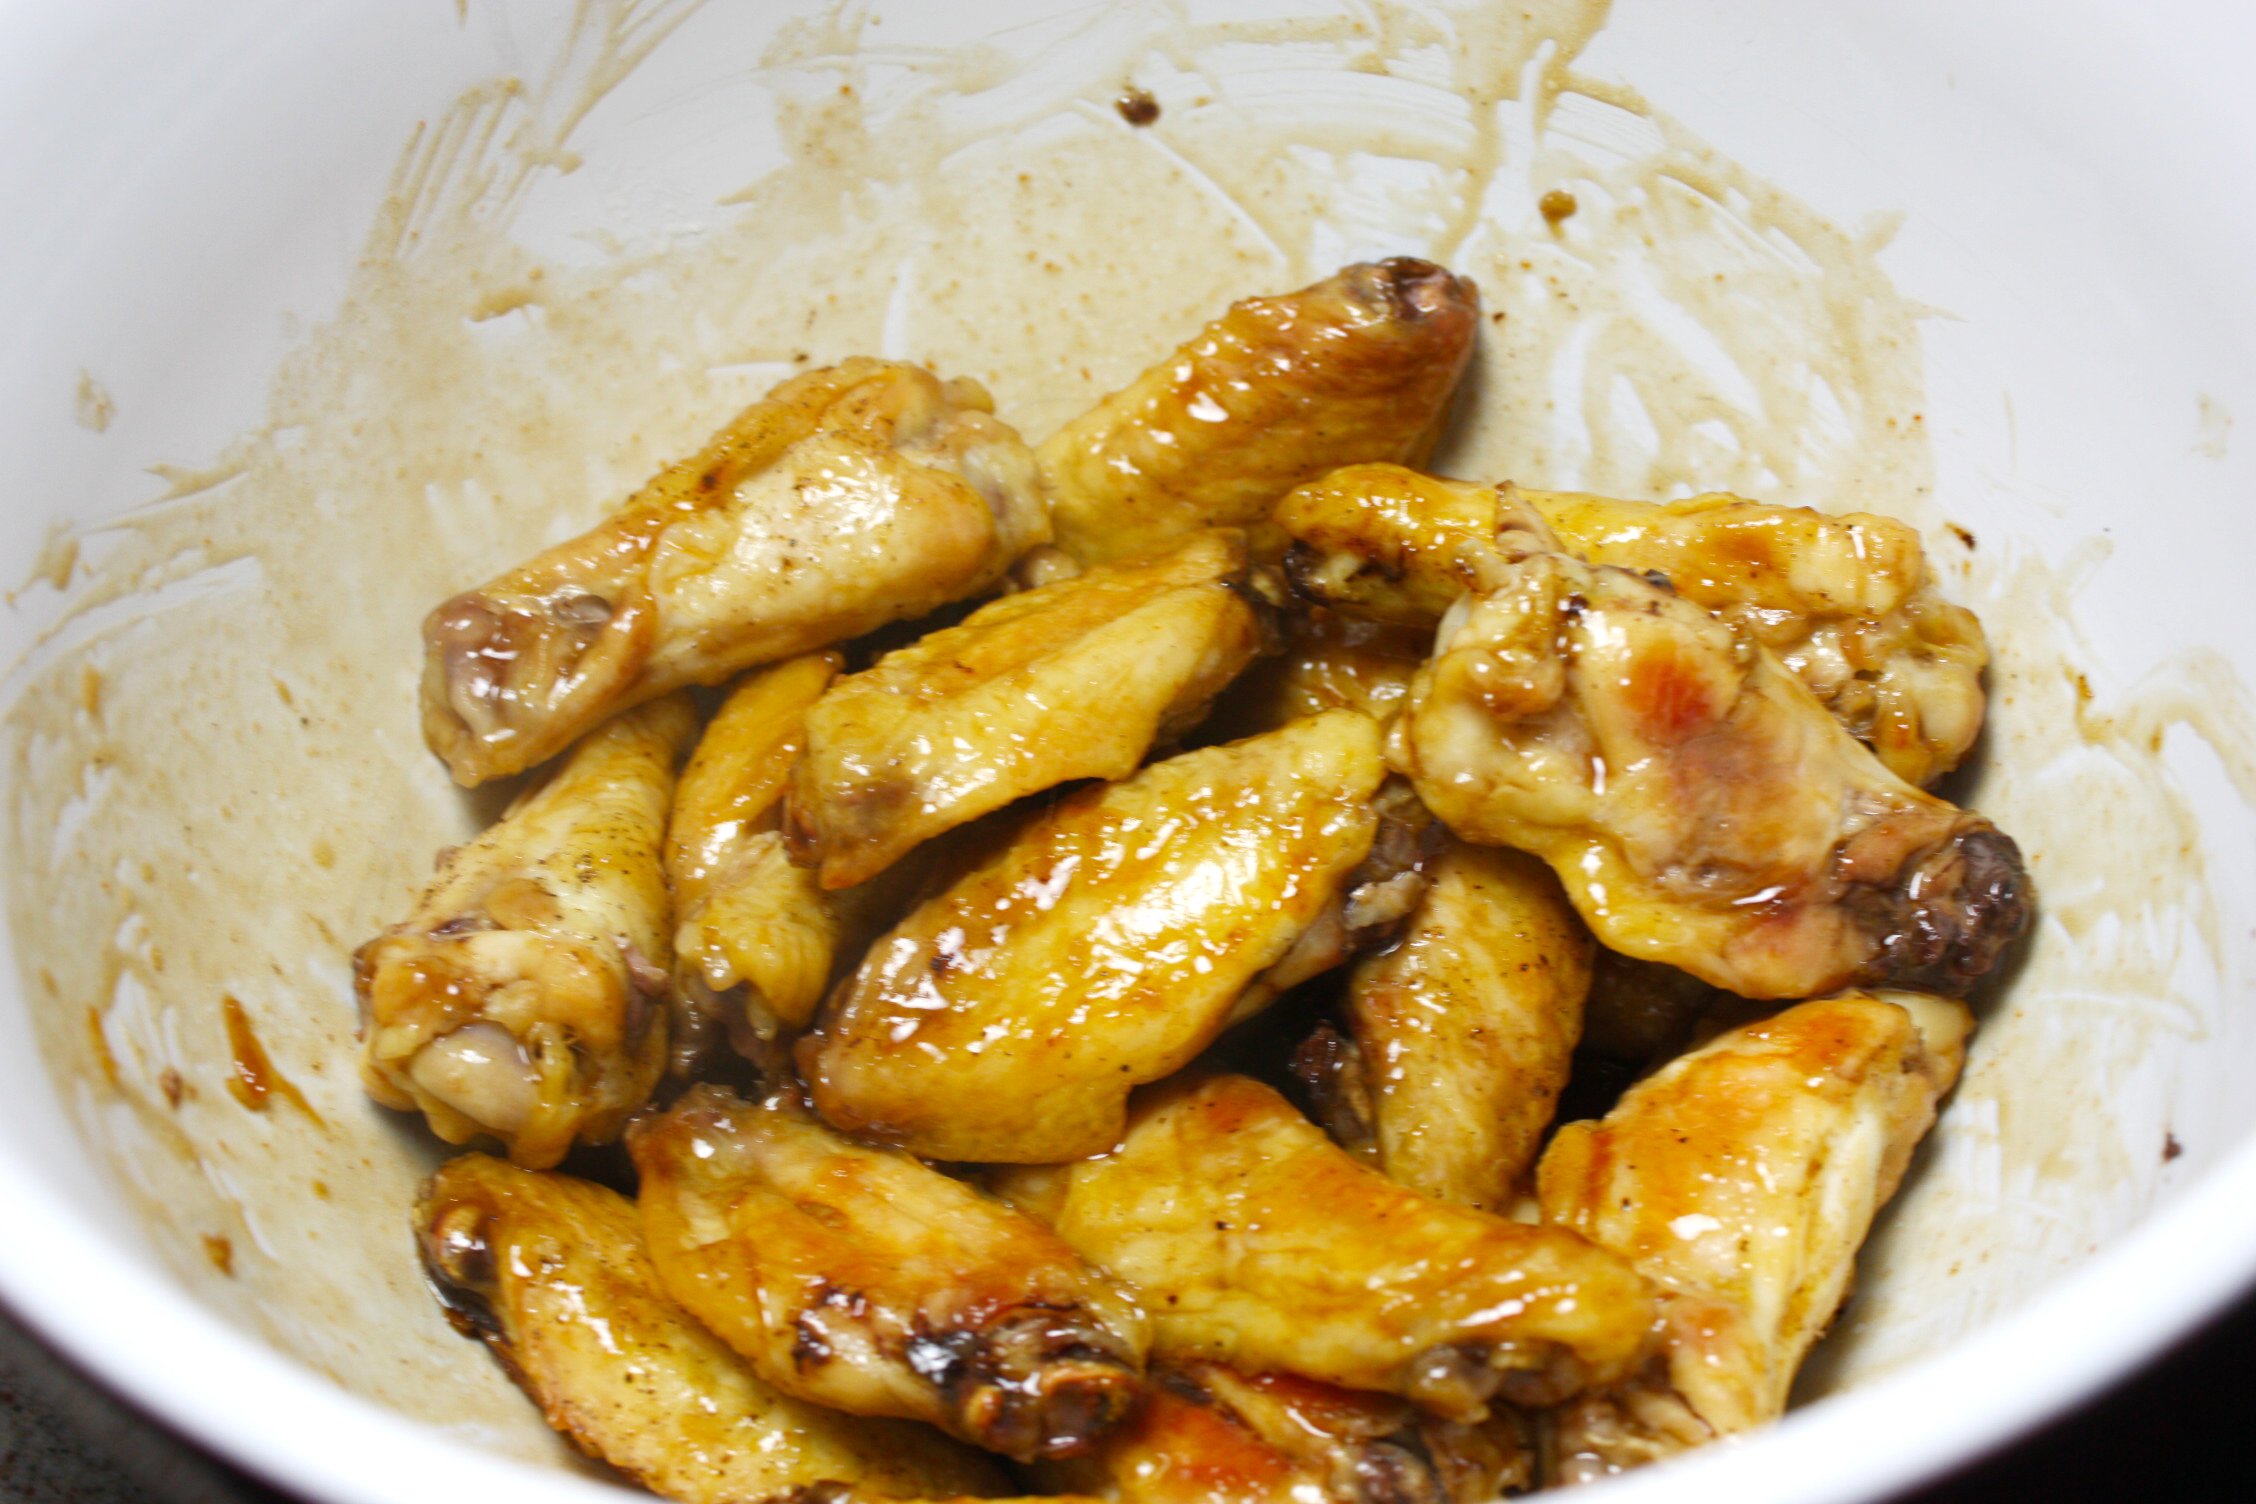 Cooked chicken wings tossed with the sauce in a white bowl.